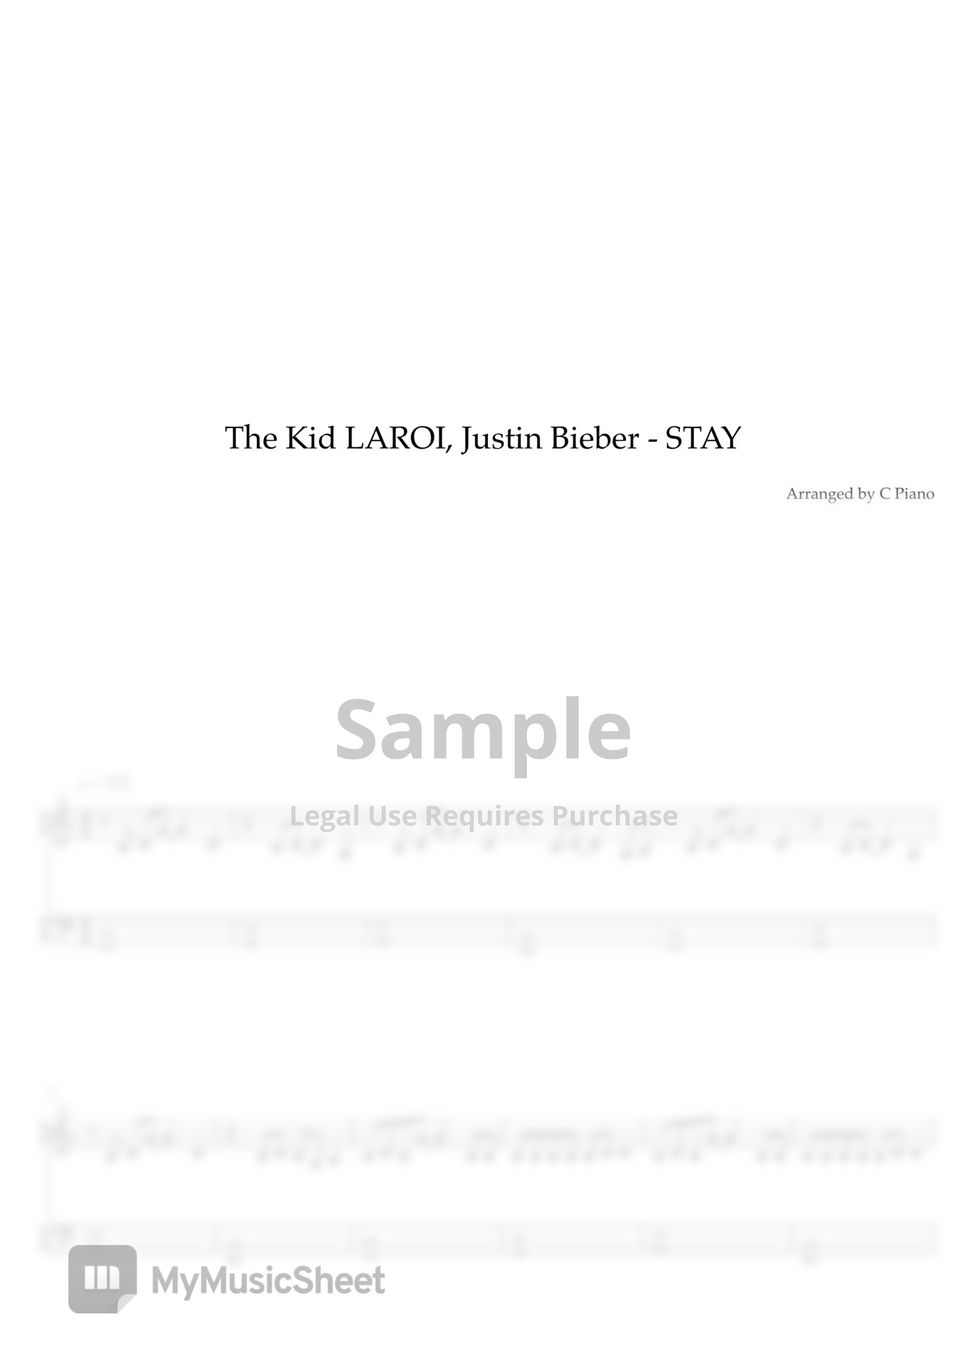 The Kid LAROI, Justin Bieber - Stay (Easy Version) Sheets by C Piano